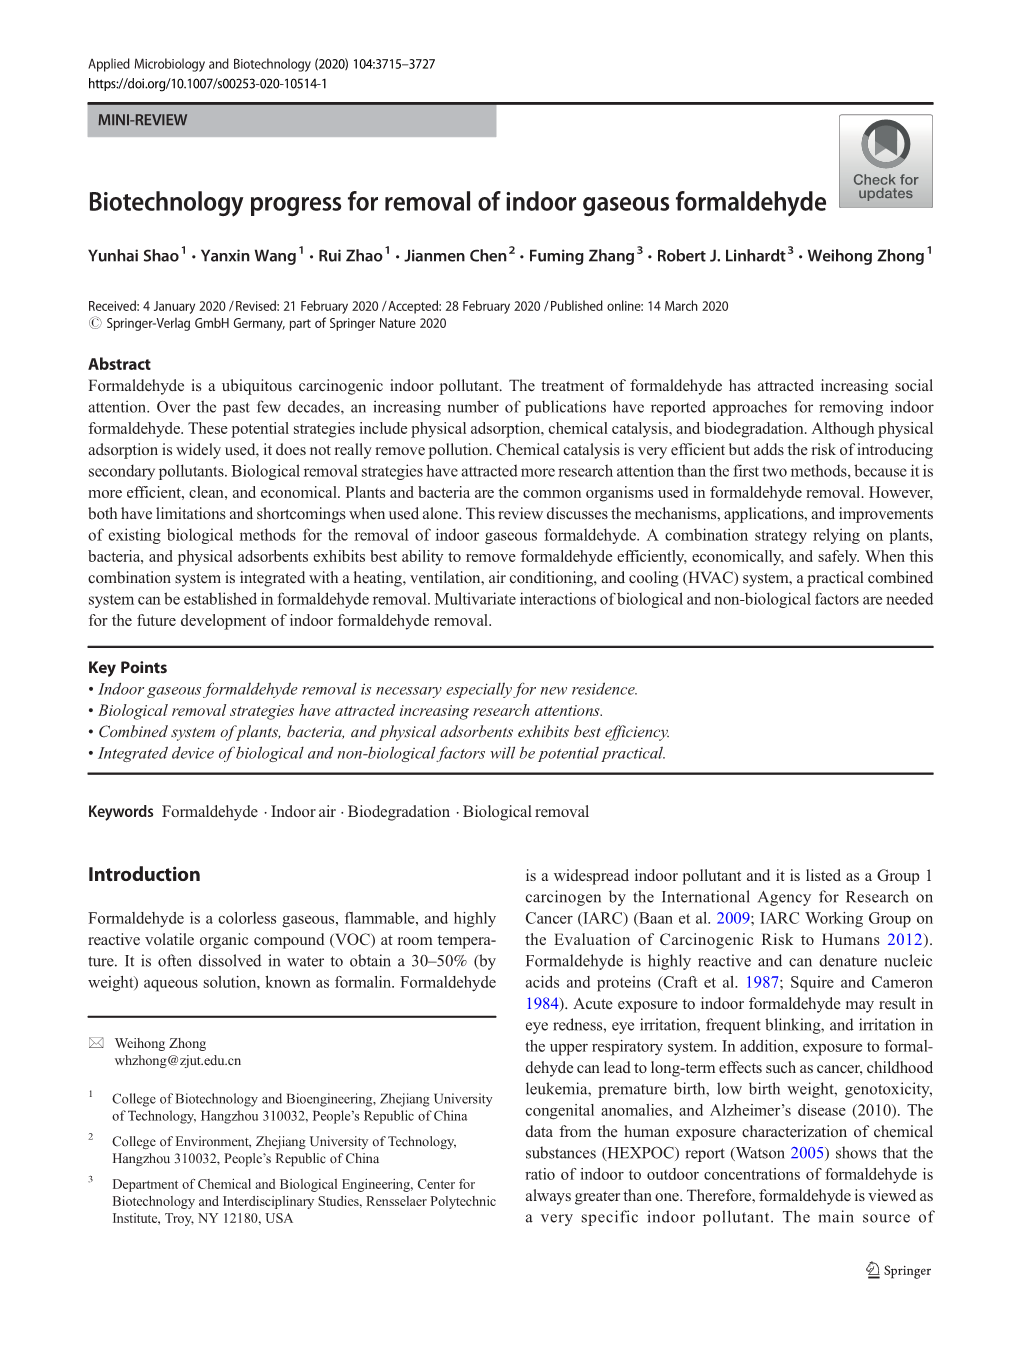 Biotechnology Progress for Removal of Indoor Gaseous Formaldehyde